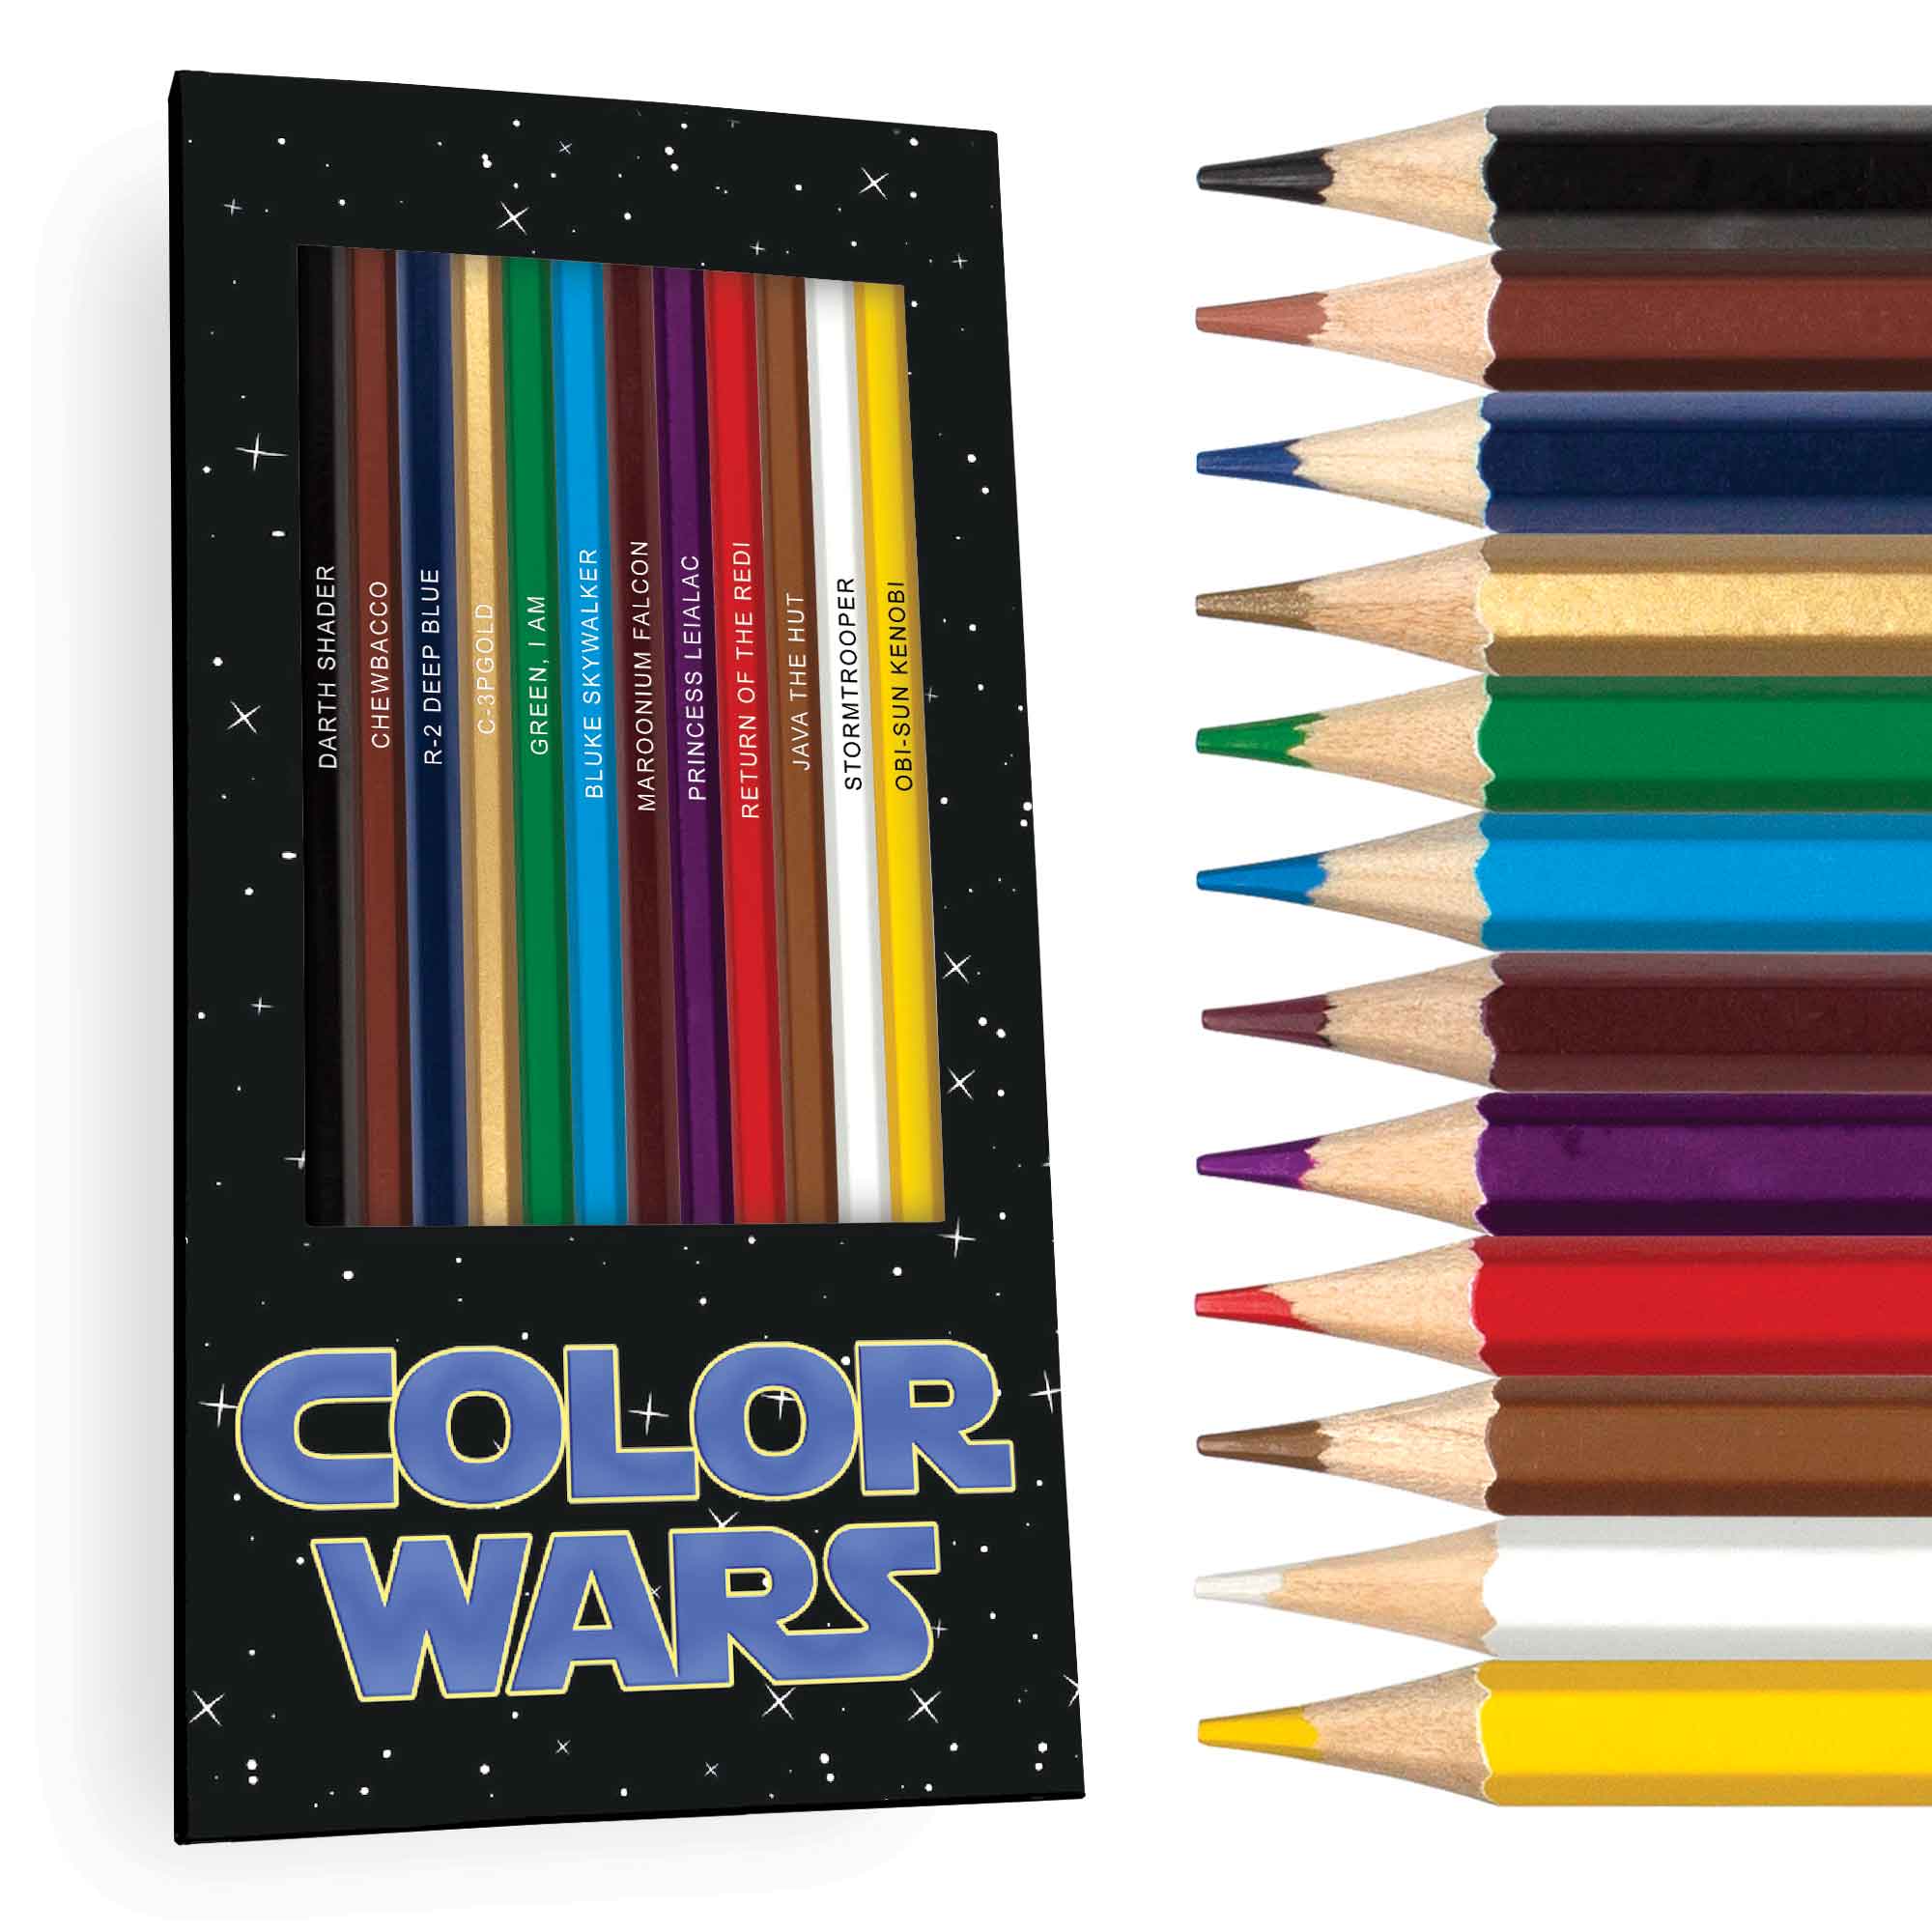 Color Wars Colored Pencil Set for Fans | Set of 12 Parody Pencils | Each Color Pencil Is Foil-Stamped with Clever References | Great Gift for Fans